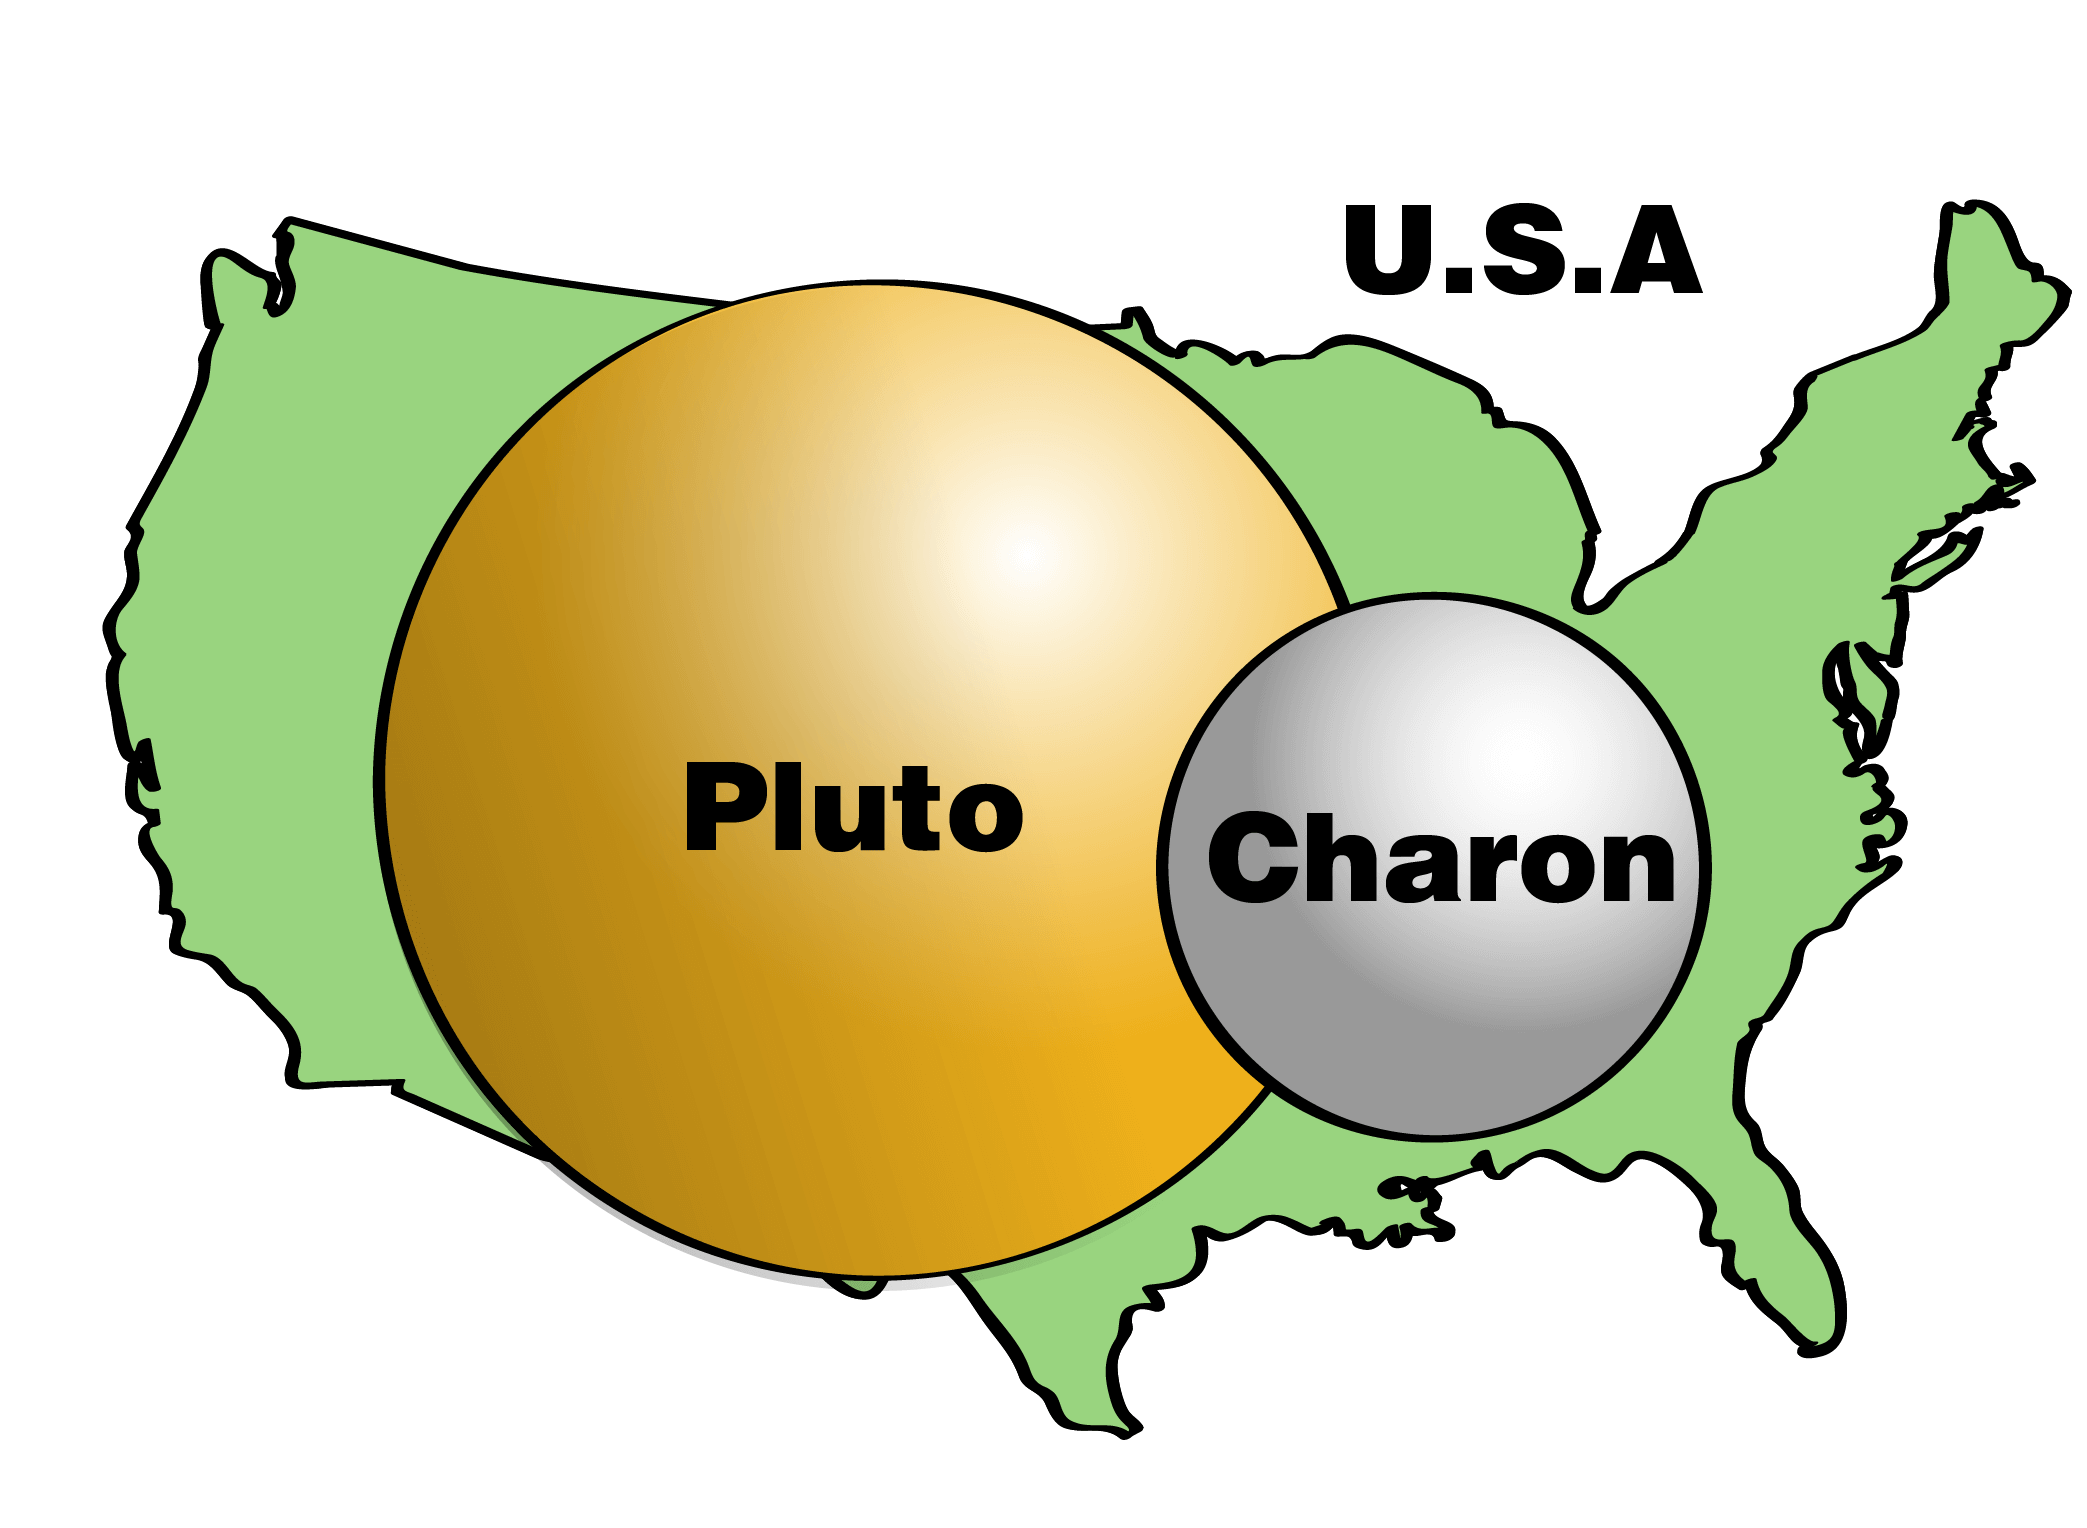 Pluto and Charon compared to the USA.